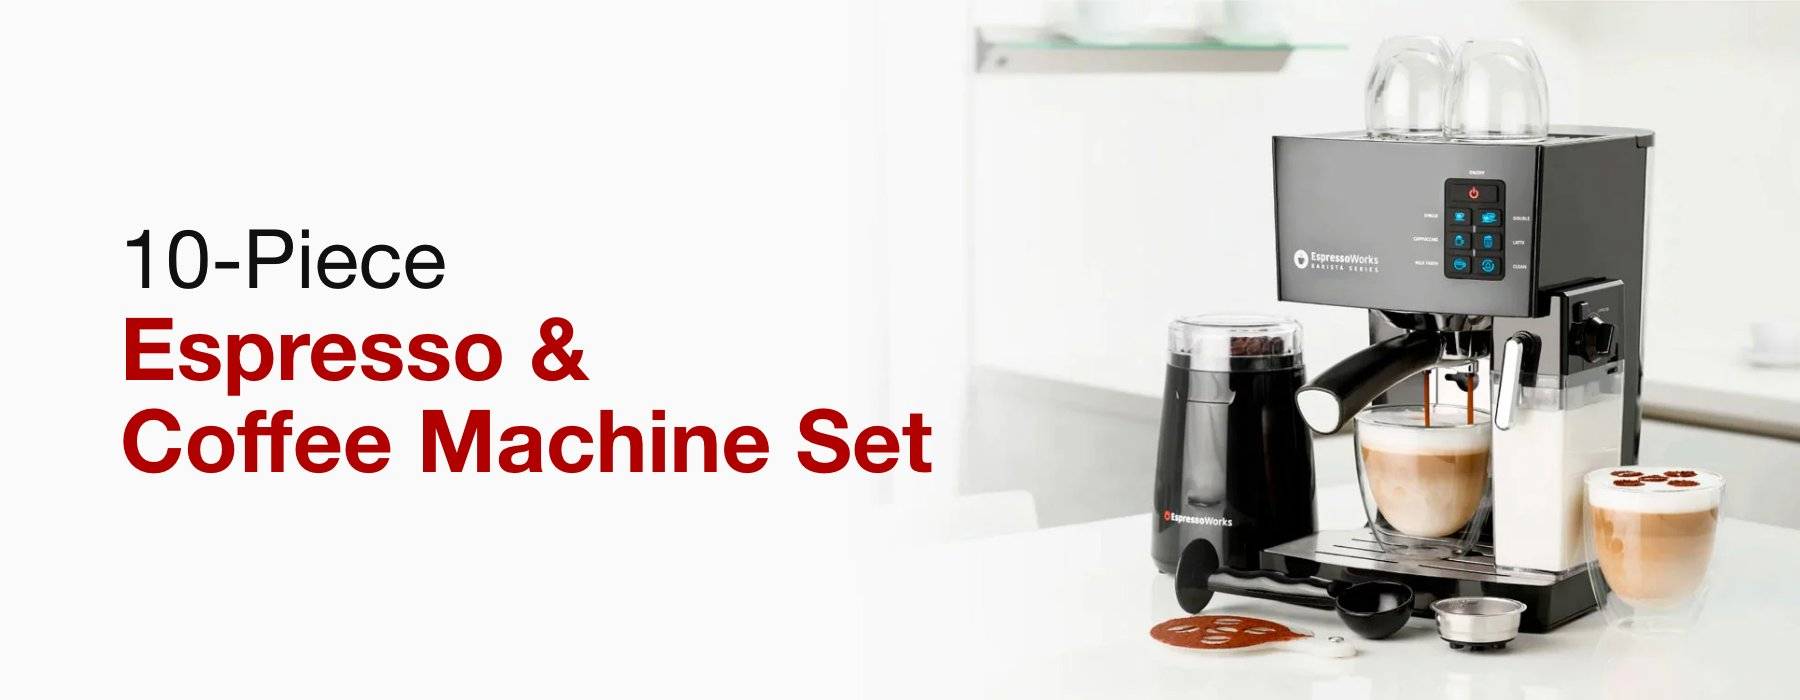 Frequently Asked Questions about the EspressoWorks 10-Piece Espresso and Cappuccino Machine Set